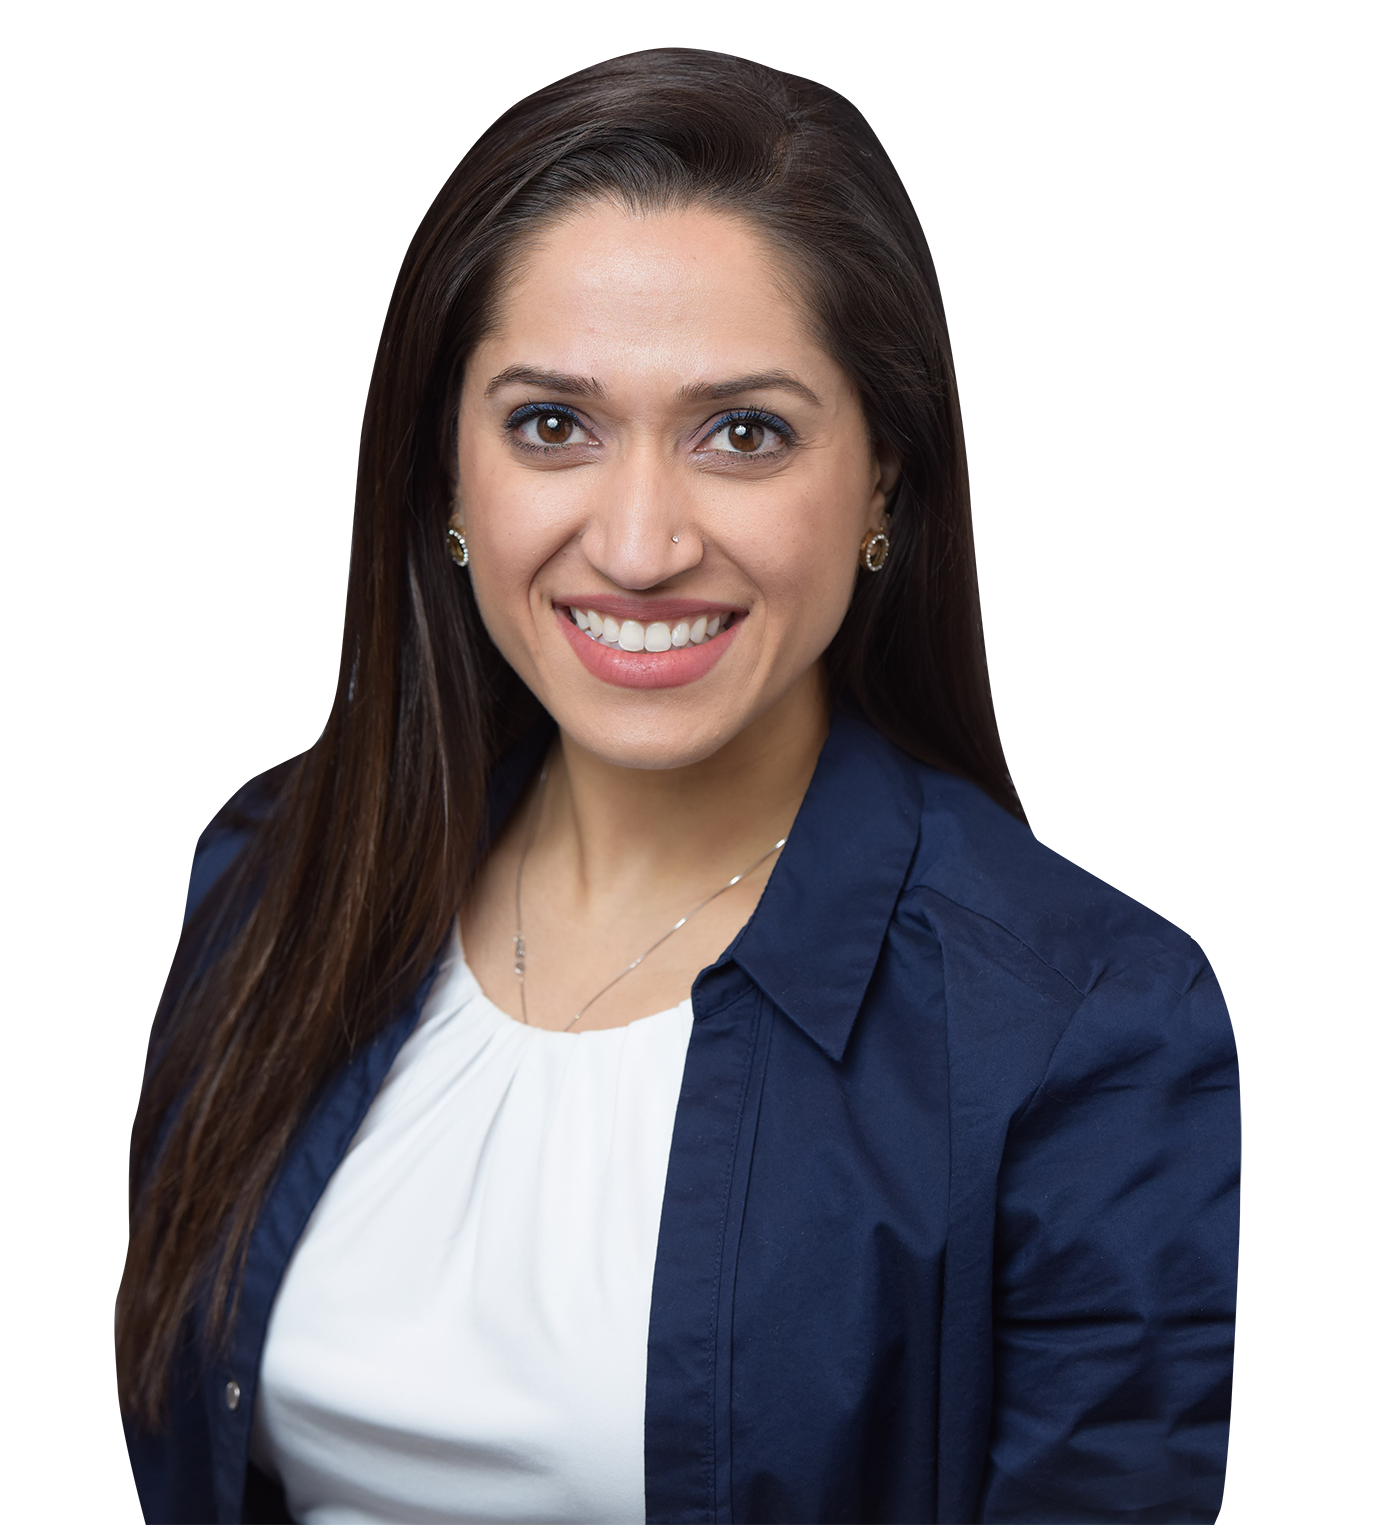 Portrait of Dr. Tanvi Arora Bakshi, smiling with dark hair, wearing a navy blue blazer and white top.